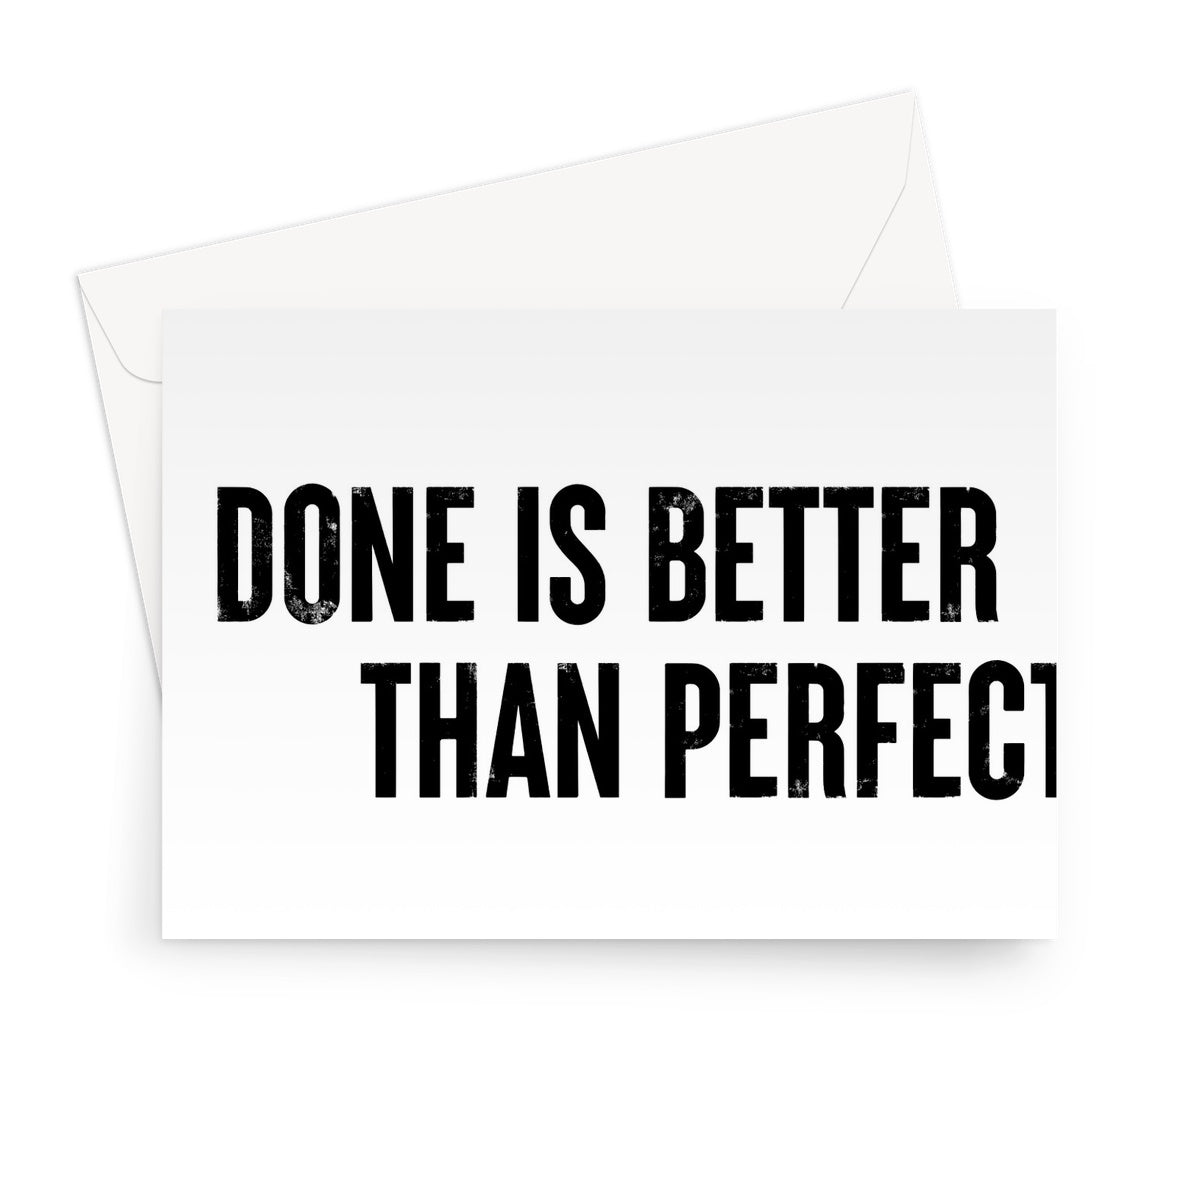 DONE IS BETTER - White/Black Greeting Card